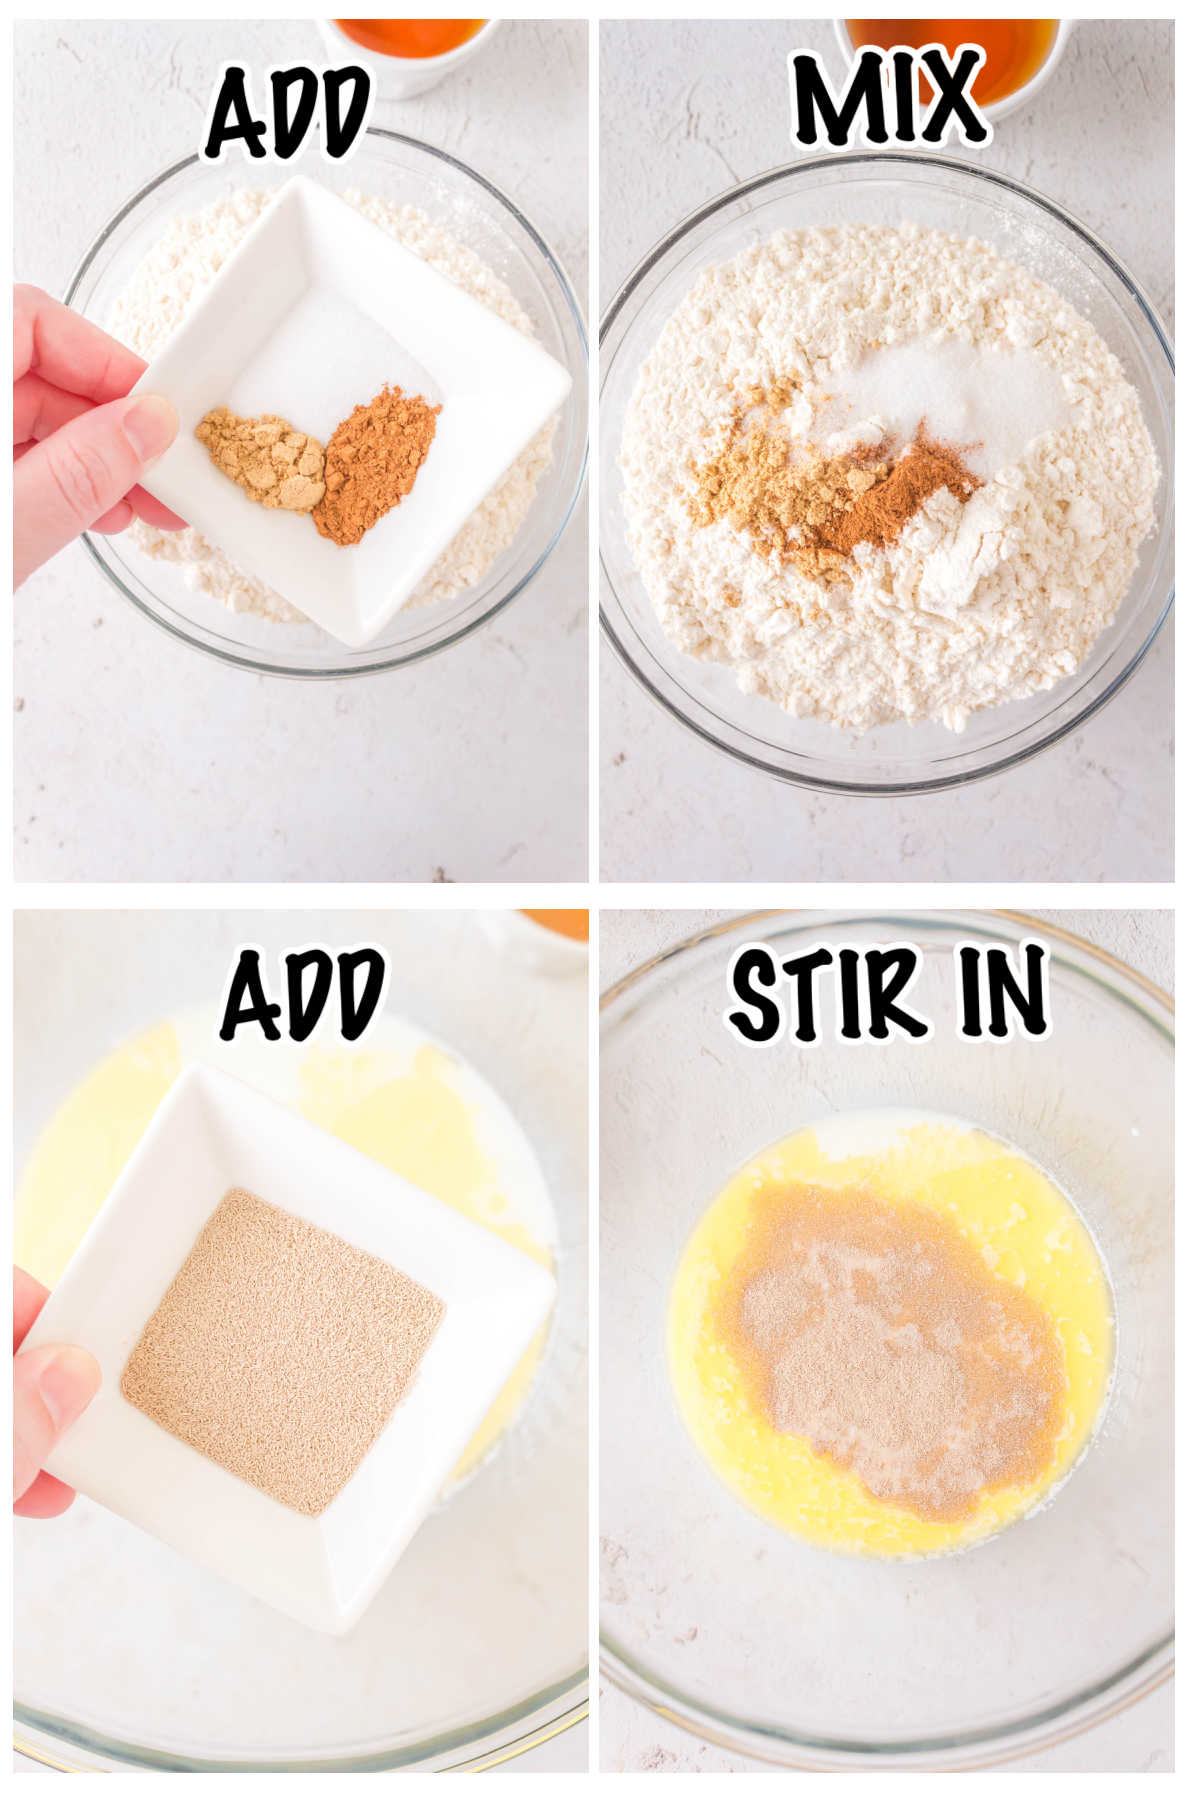 Steps for adding the yeast to the dough.